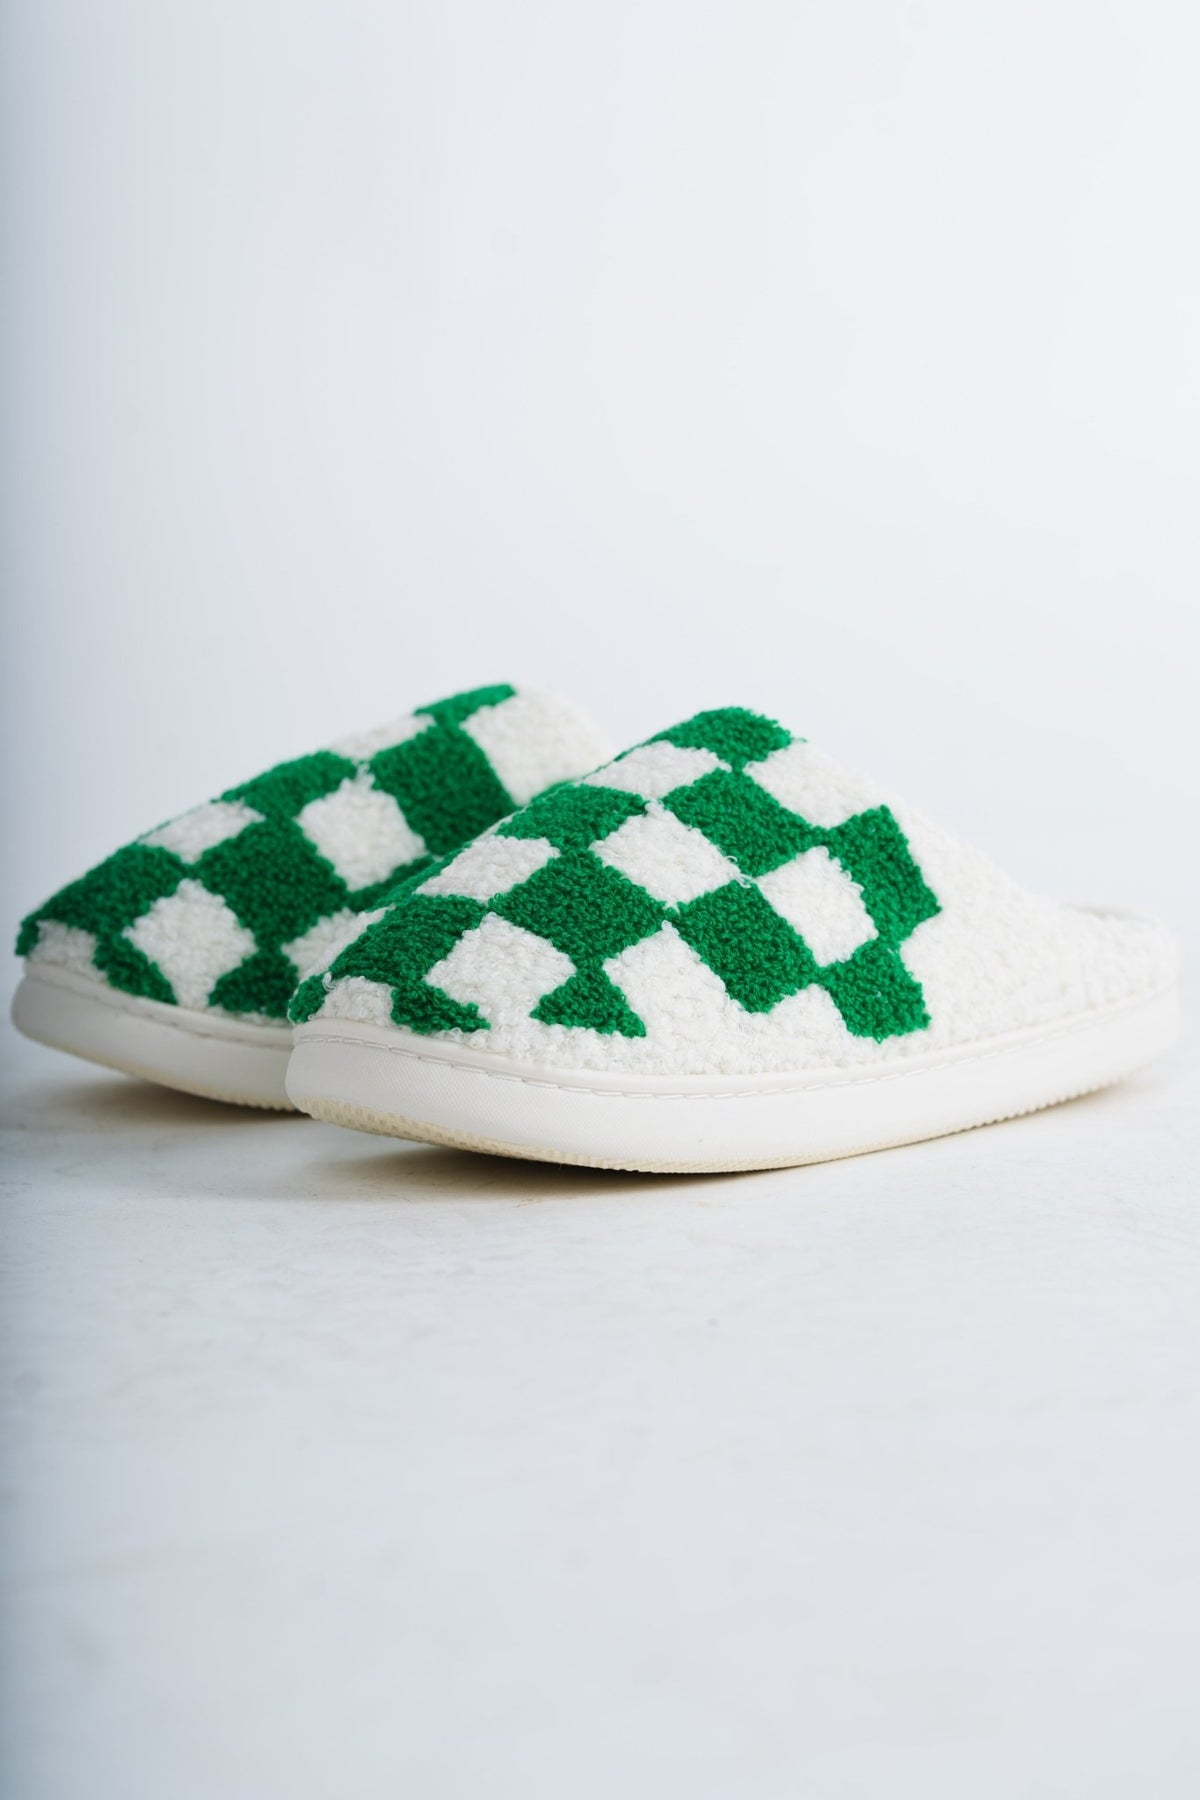 Checkered slip on slippers green - Trendy slippers - Cute Loungewear Collection at Lush Fashion Lounge Boutique in Oklahoma City